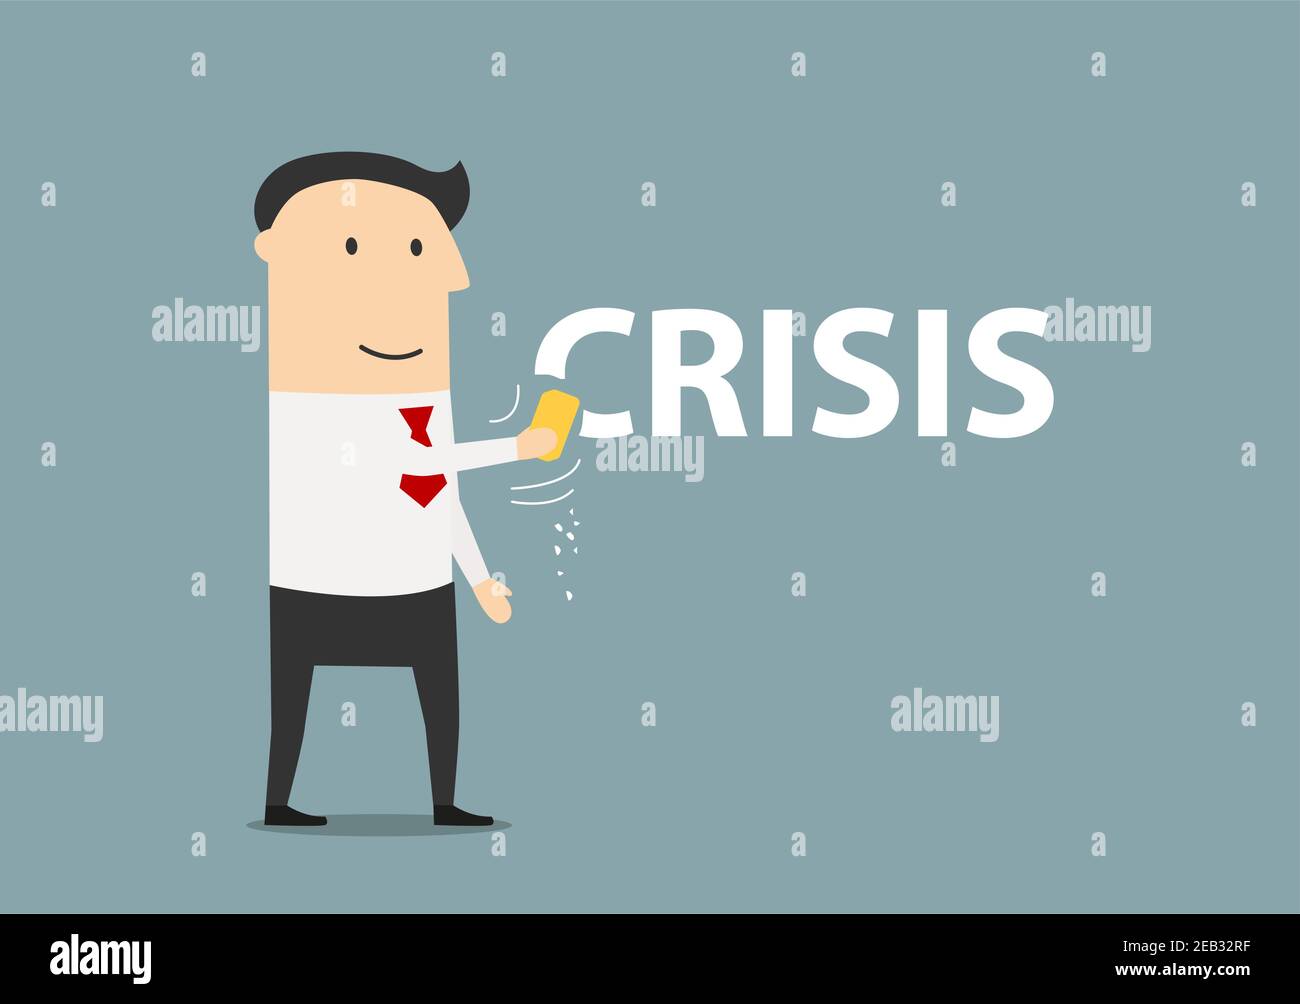 Successful and happy cartoon businessman wiping off the word Crisis by